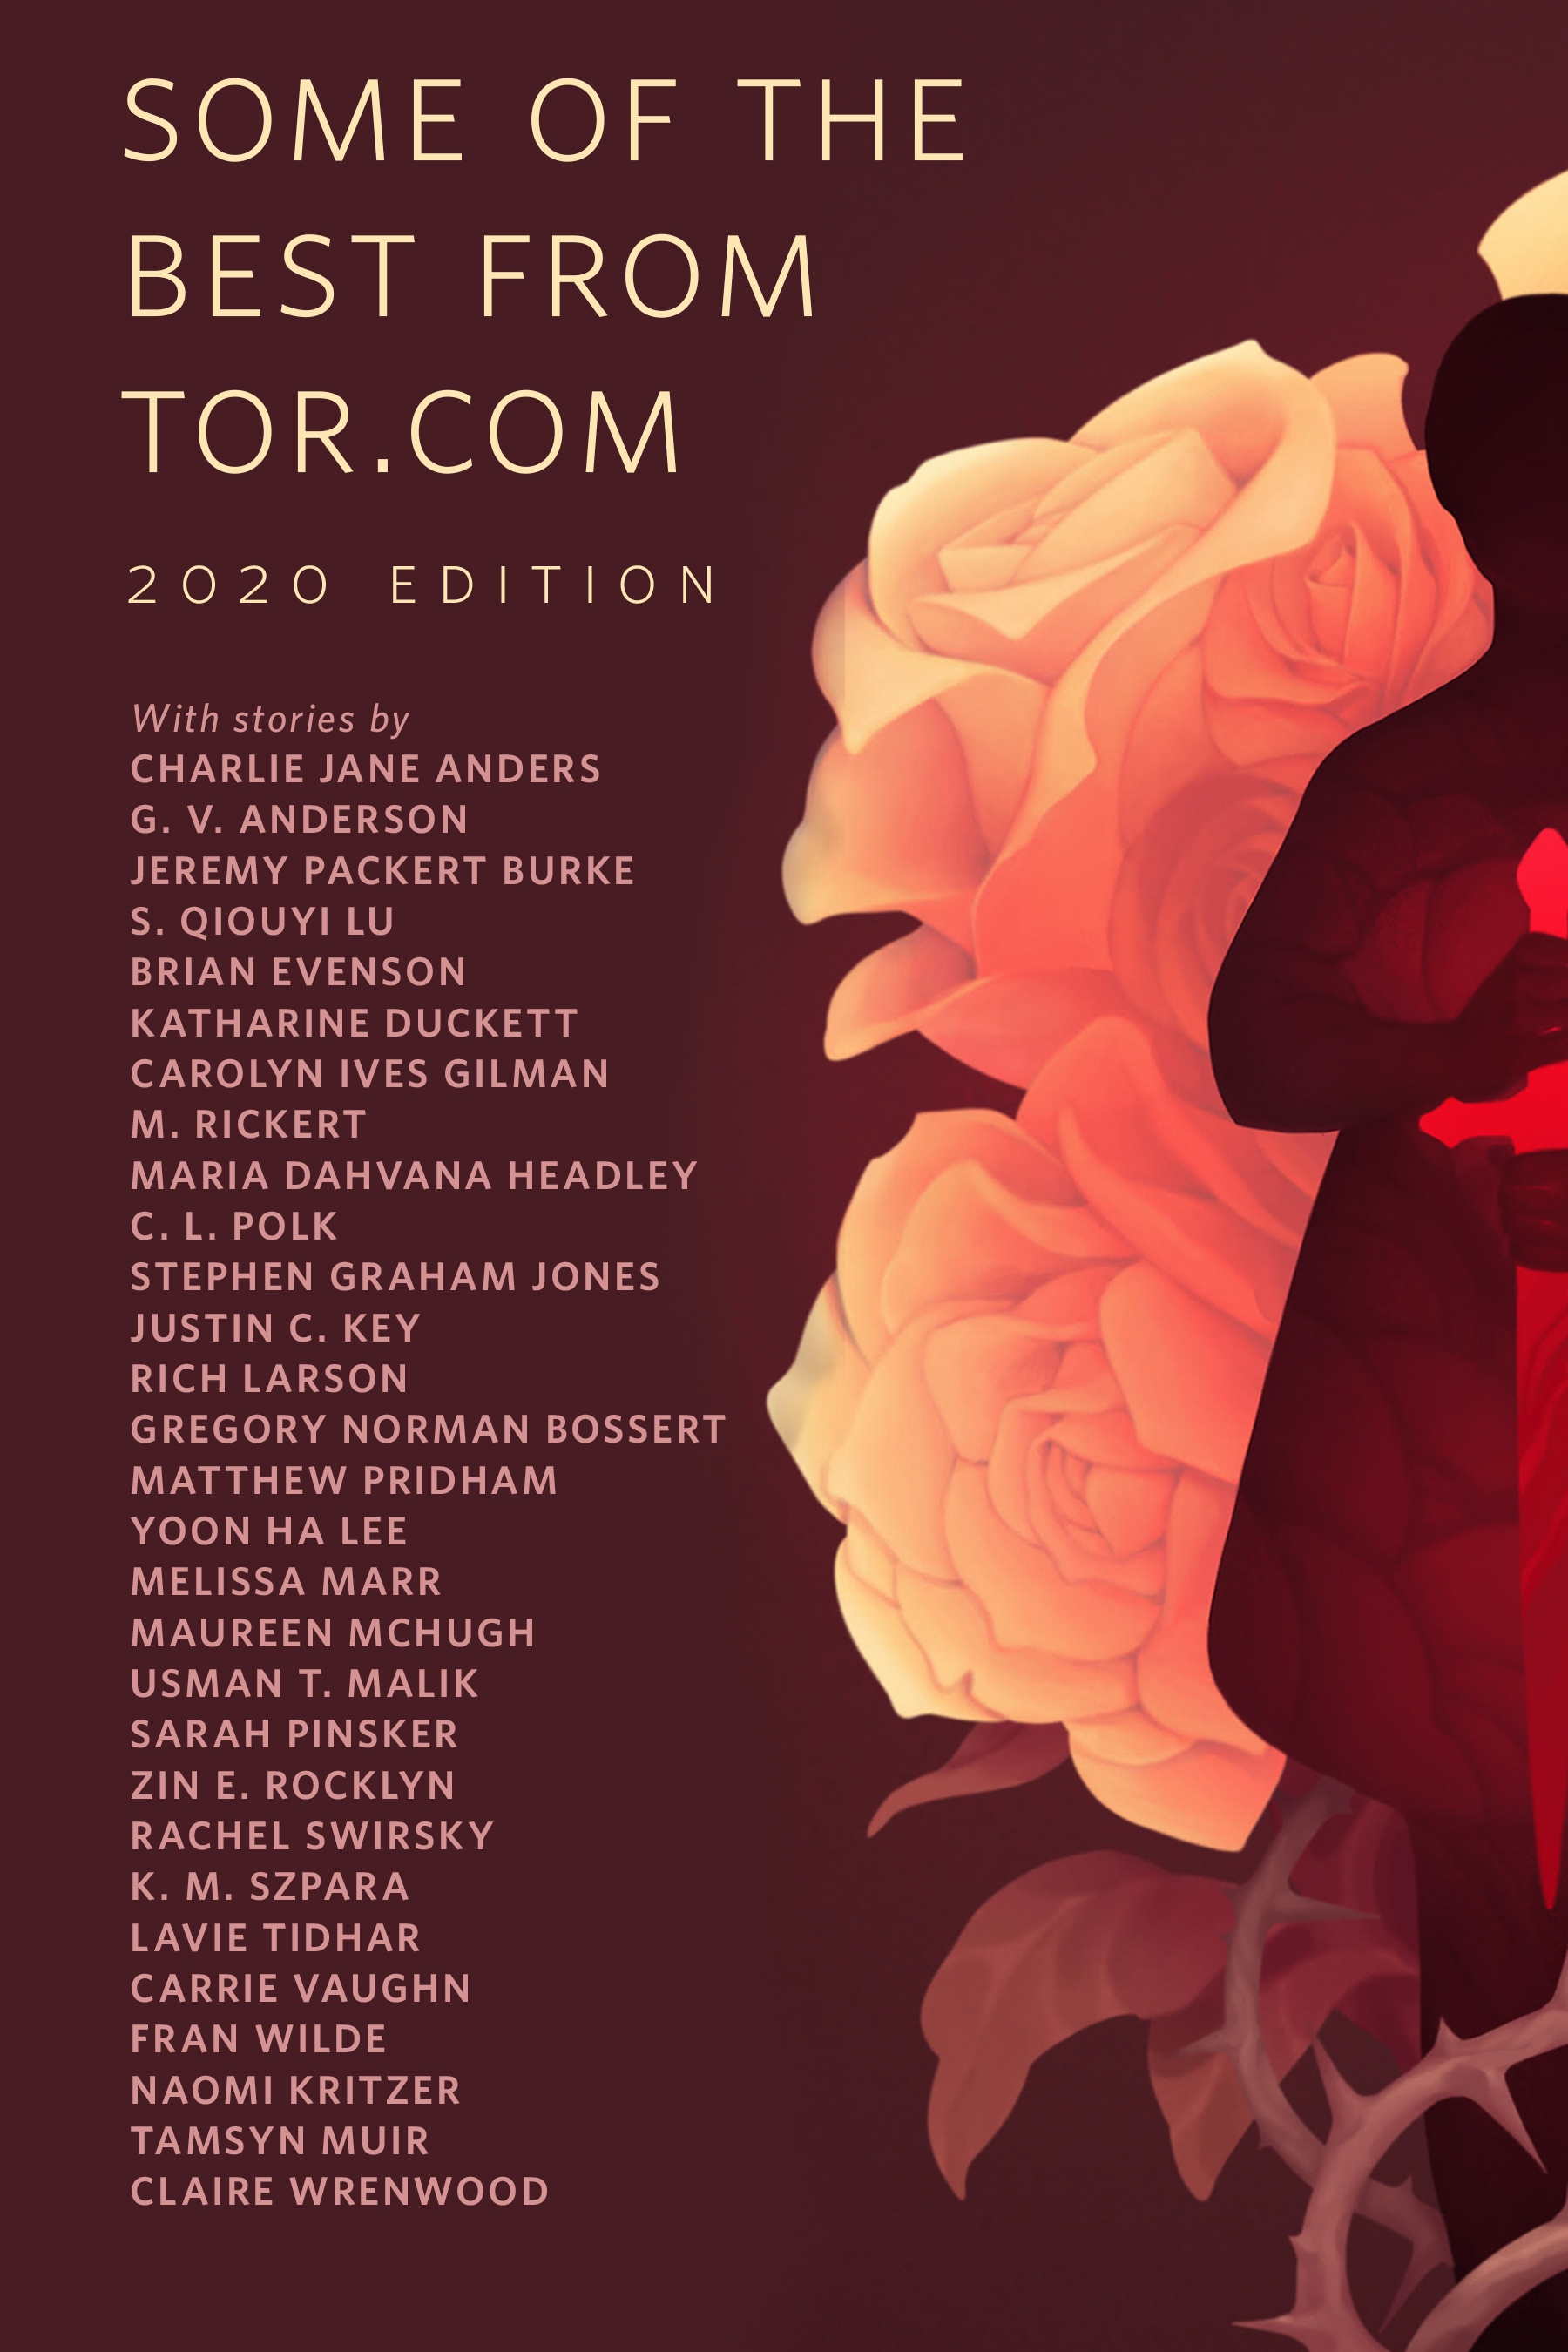 Some of the Best from Tor.com: 2020 Edition : A Tor.com Original by Charlie Jane Anders, G. V. Anderson, Gregory Norman Bossert, Jeremy Packert Burke, Katharine Duckett, Brian Evenson, Carolyn Ives Gilman, Maria Dahvana Headley, Steph